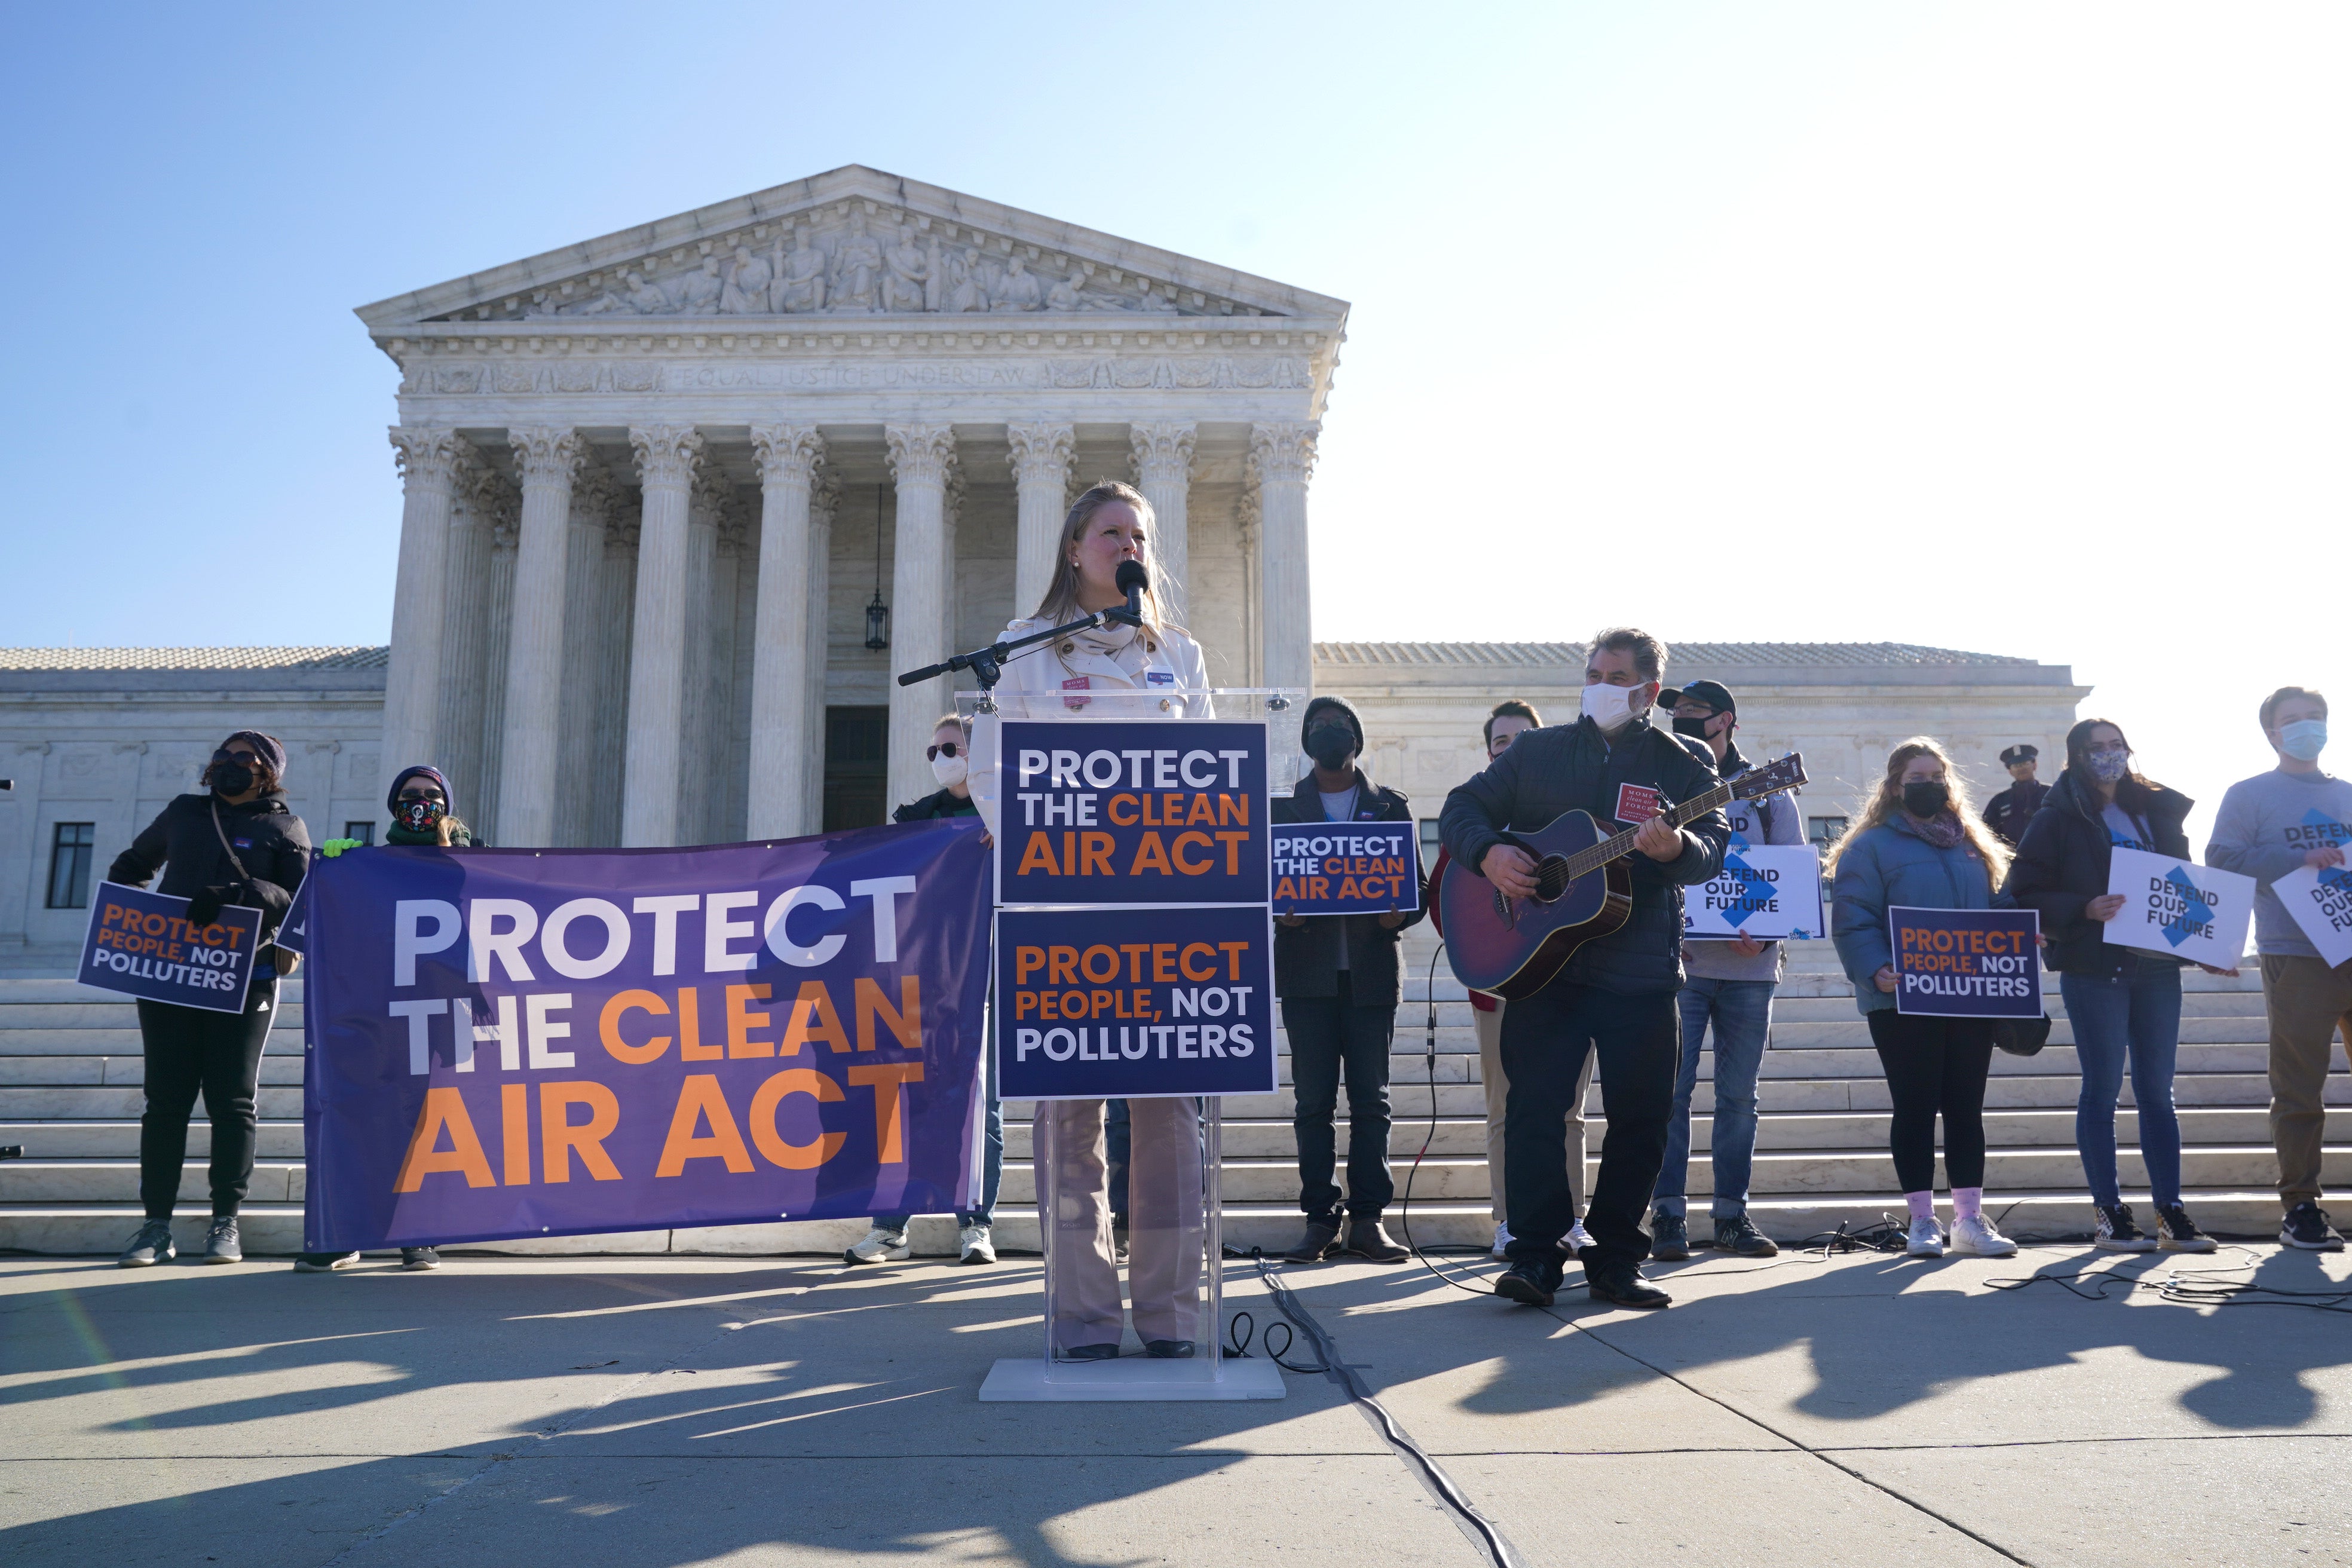 Singer Lucia Valentine performs outside as the Supreme Court hears from coal companies and their partisan allies who are trying to gut the Clean Air Act and block climate action. Barrett was suprised when she sided with the court’s liberal judge’s in the ruling